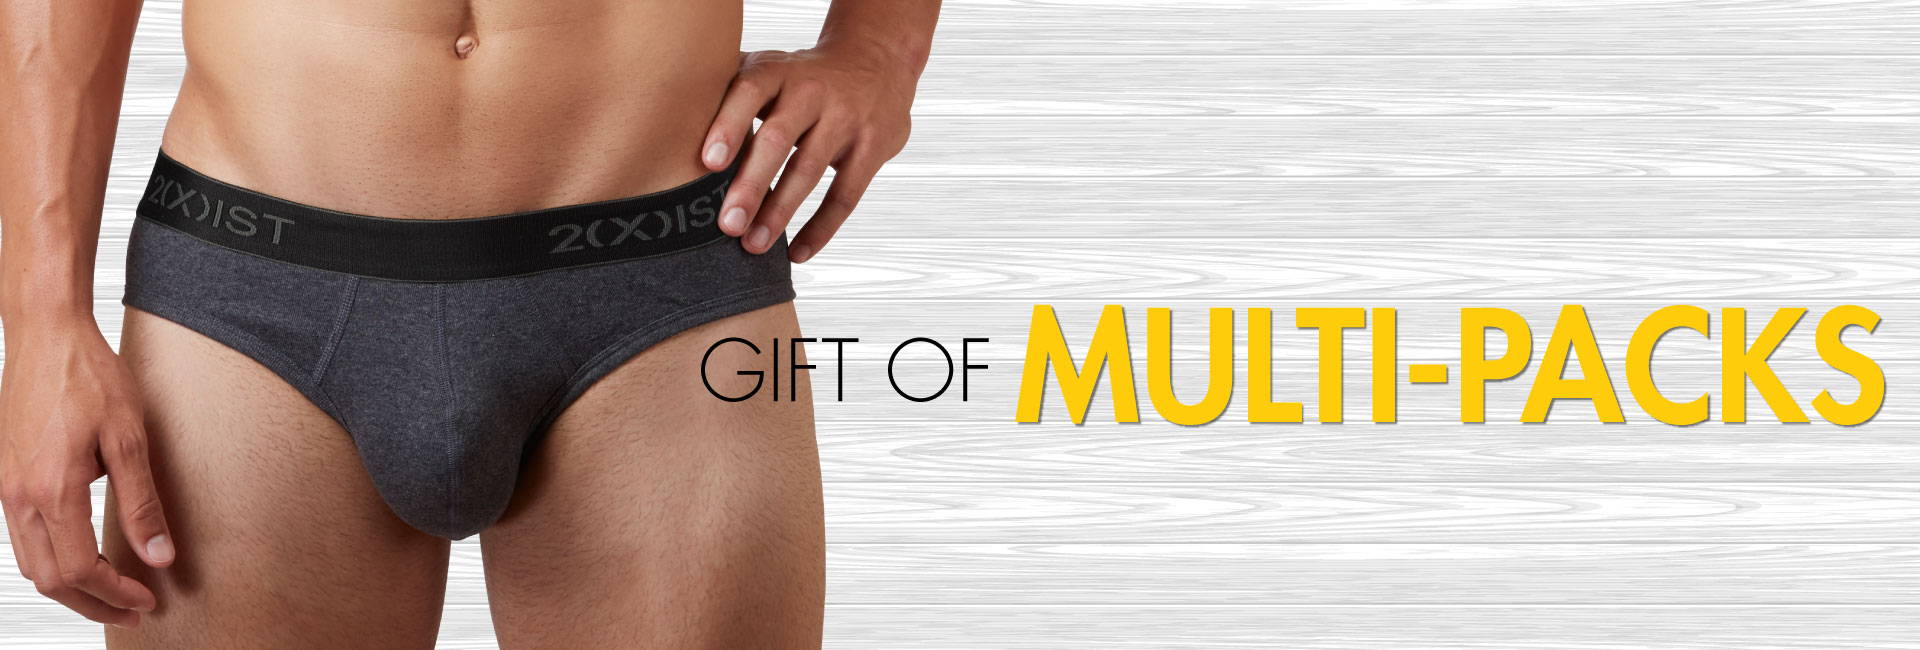 Multi Pack Underwear for Men Makes The Perfect Gift